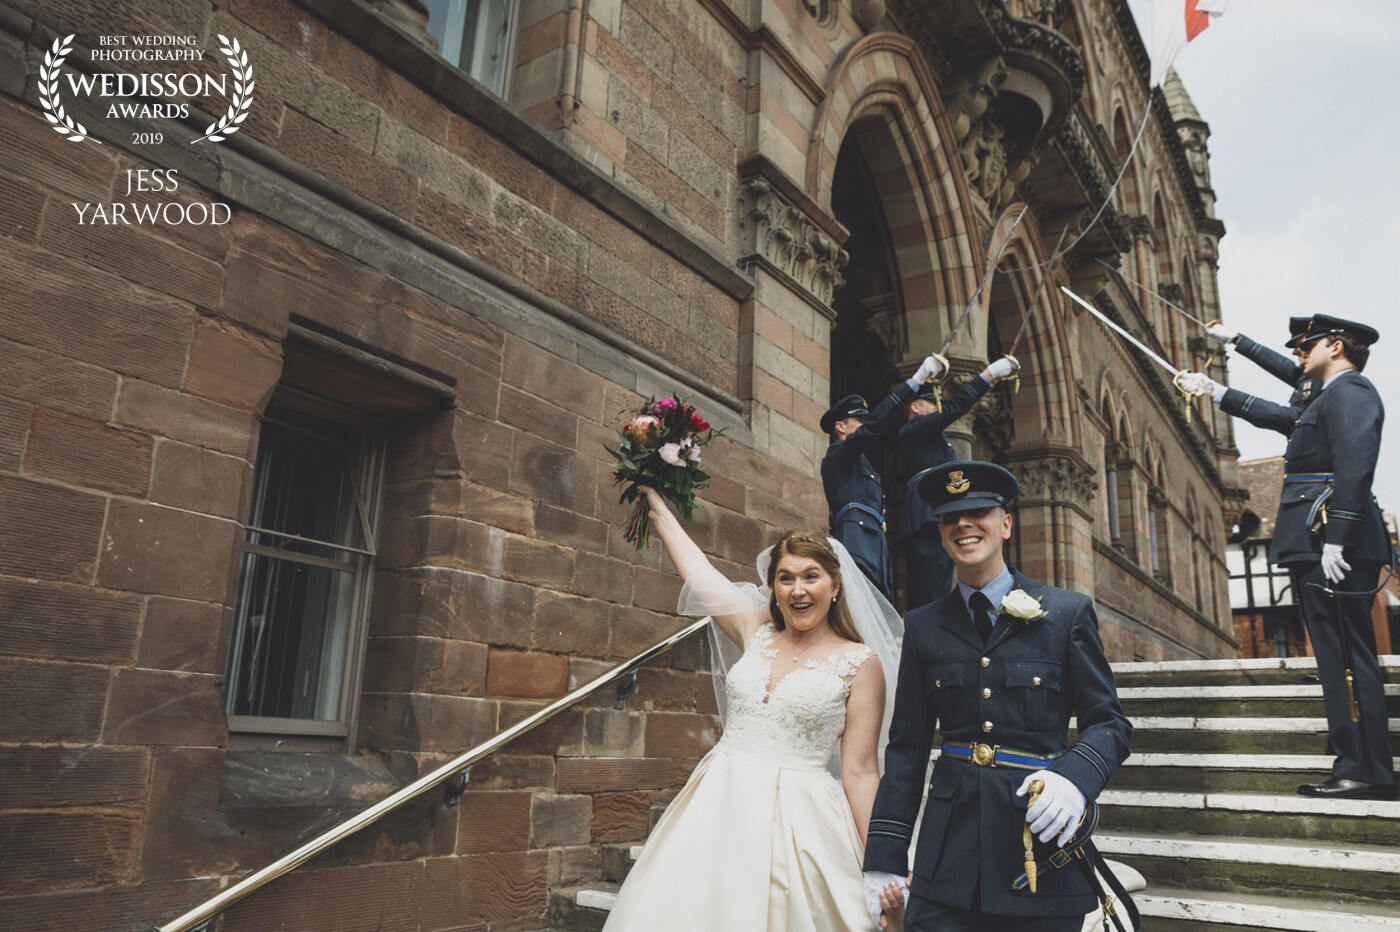 Freya & Dan tied the knot at the always stunning Chester Town Hall in Cheshire. <br />
A Military wedding with a boho vibe followed at Kings Acre!